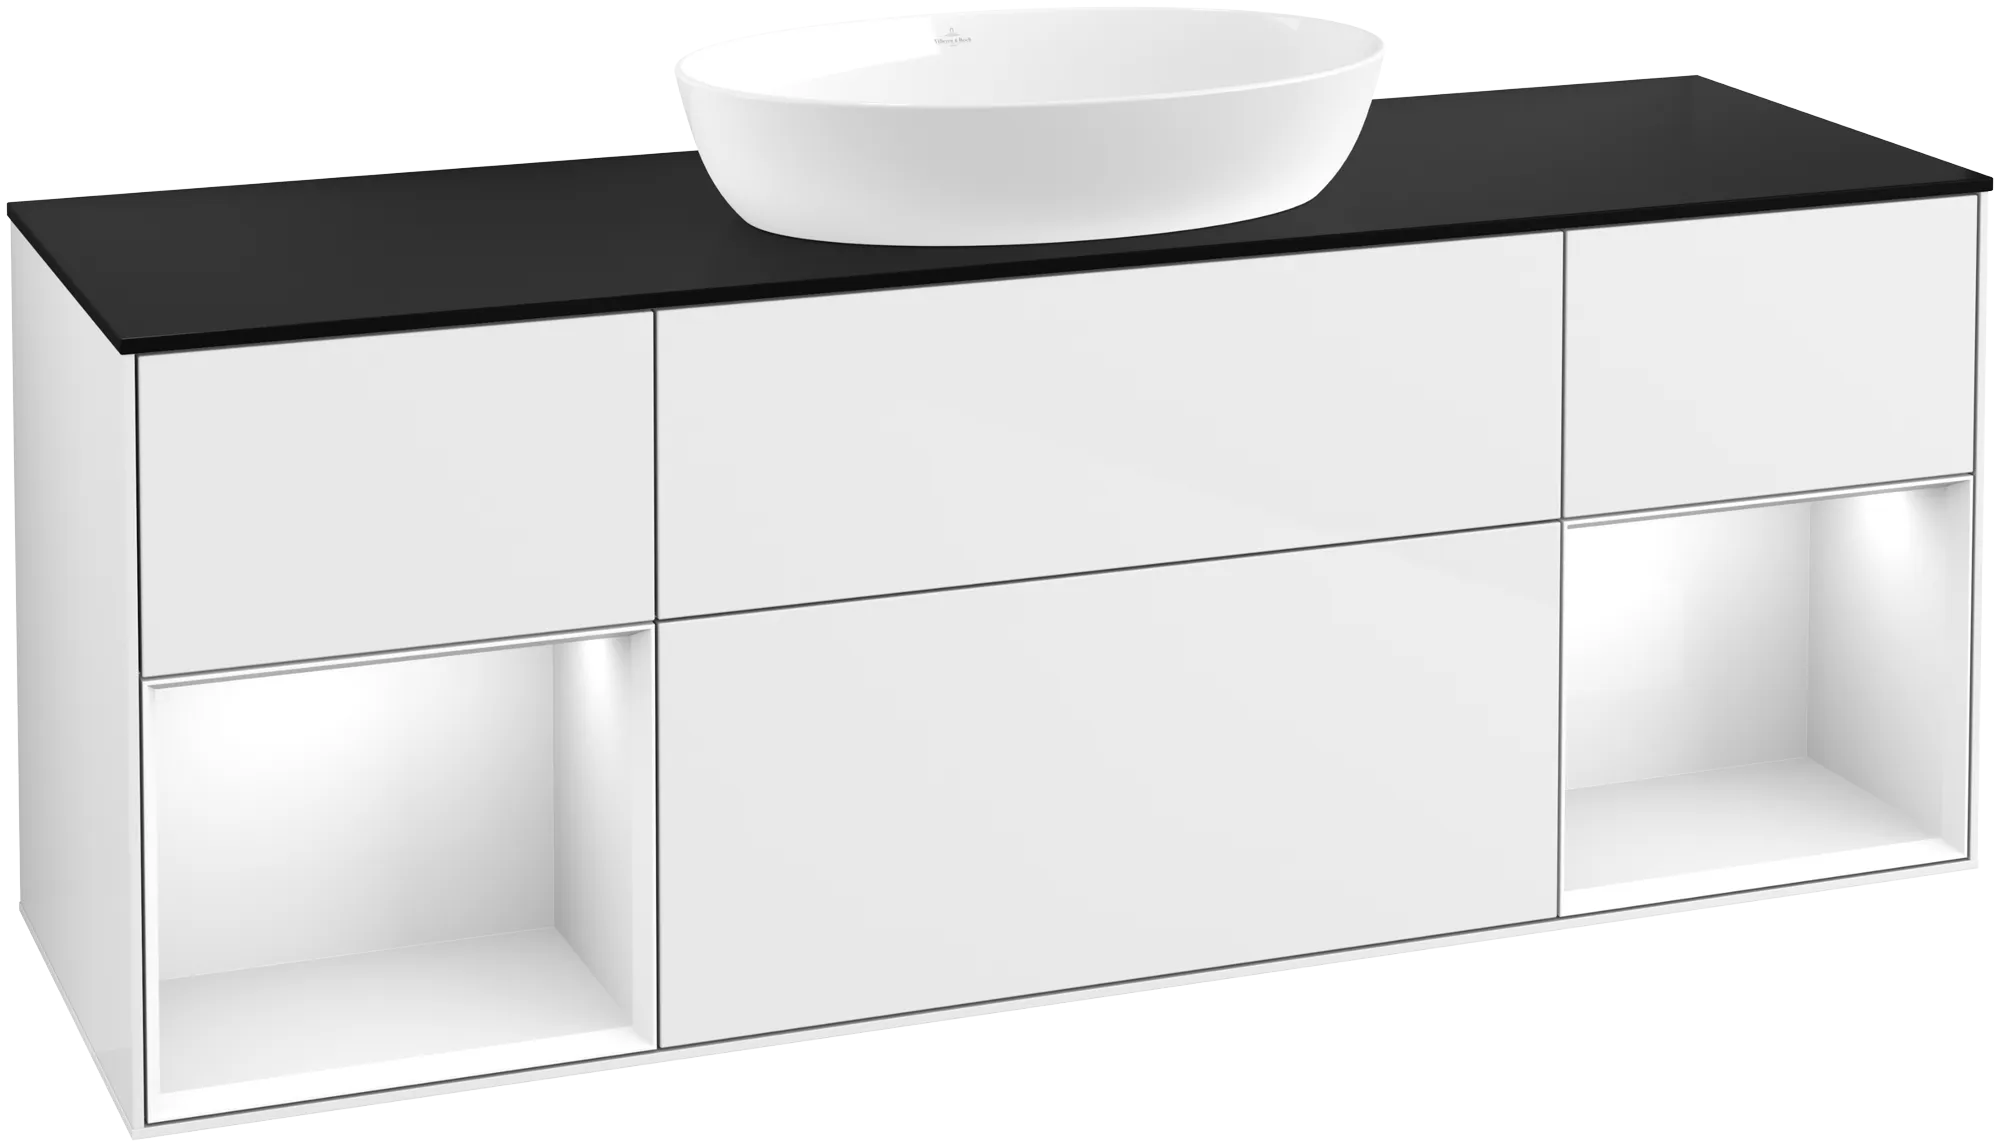 Picture of VILLEROY BOCH Finion Vanity unit, with lighting, 4 pull-out compartments, 1600 x 603 x 501 mm, Glossy White Lacquer / Glossy White Lacquer / Glass Black Matt #GD02GFGF